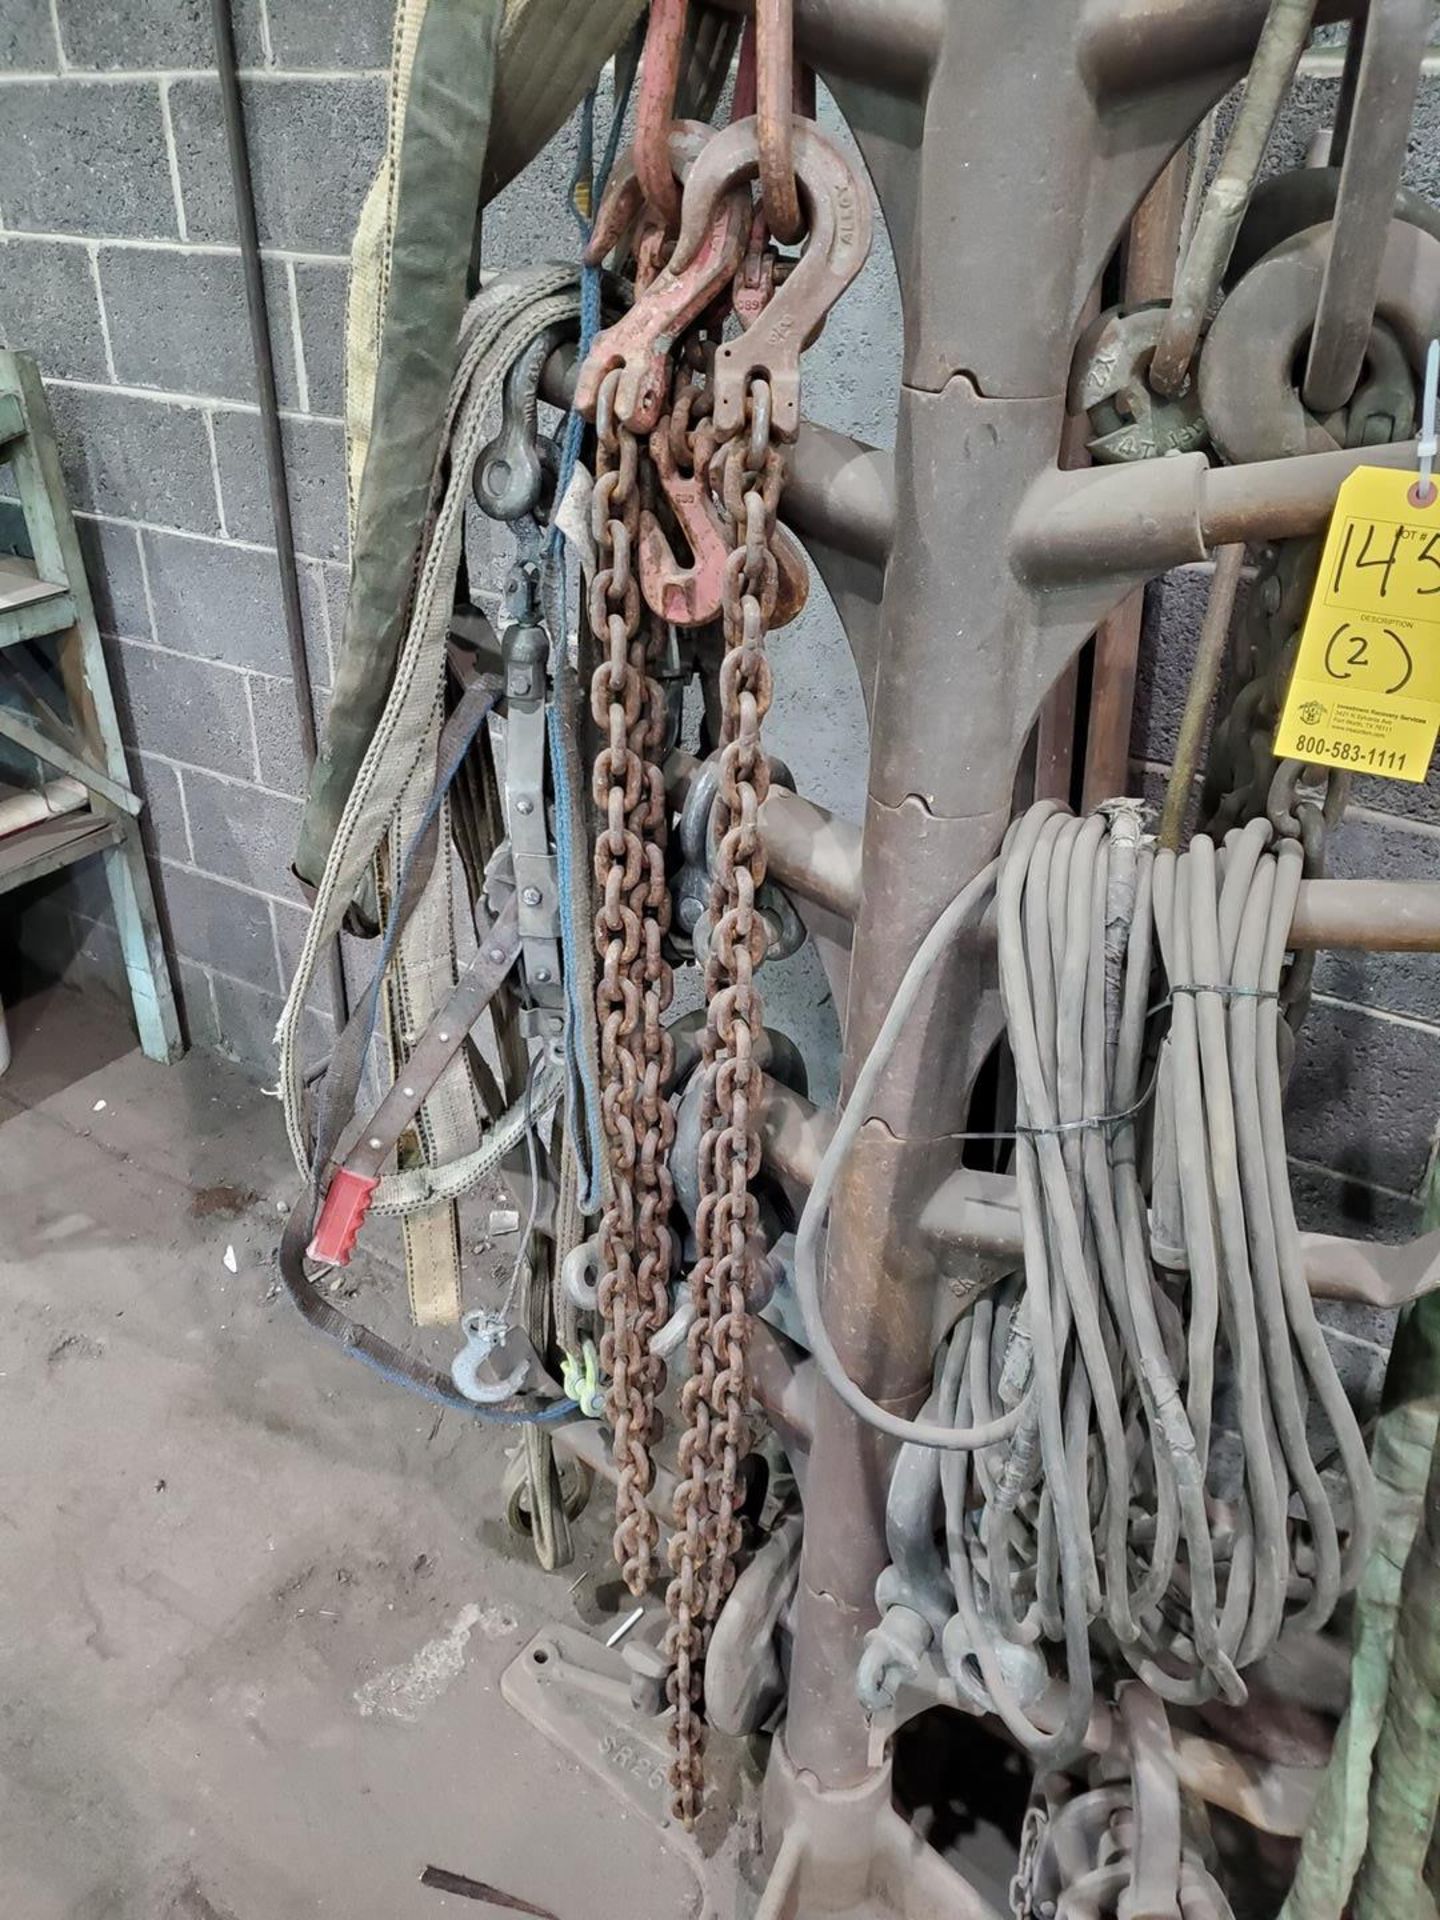 Assorted Lifting Material To Include But Not Limited To: Harnesses, Straps, Chains, Shackles, - Image 9 of 10